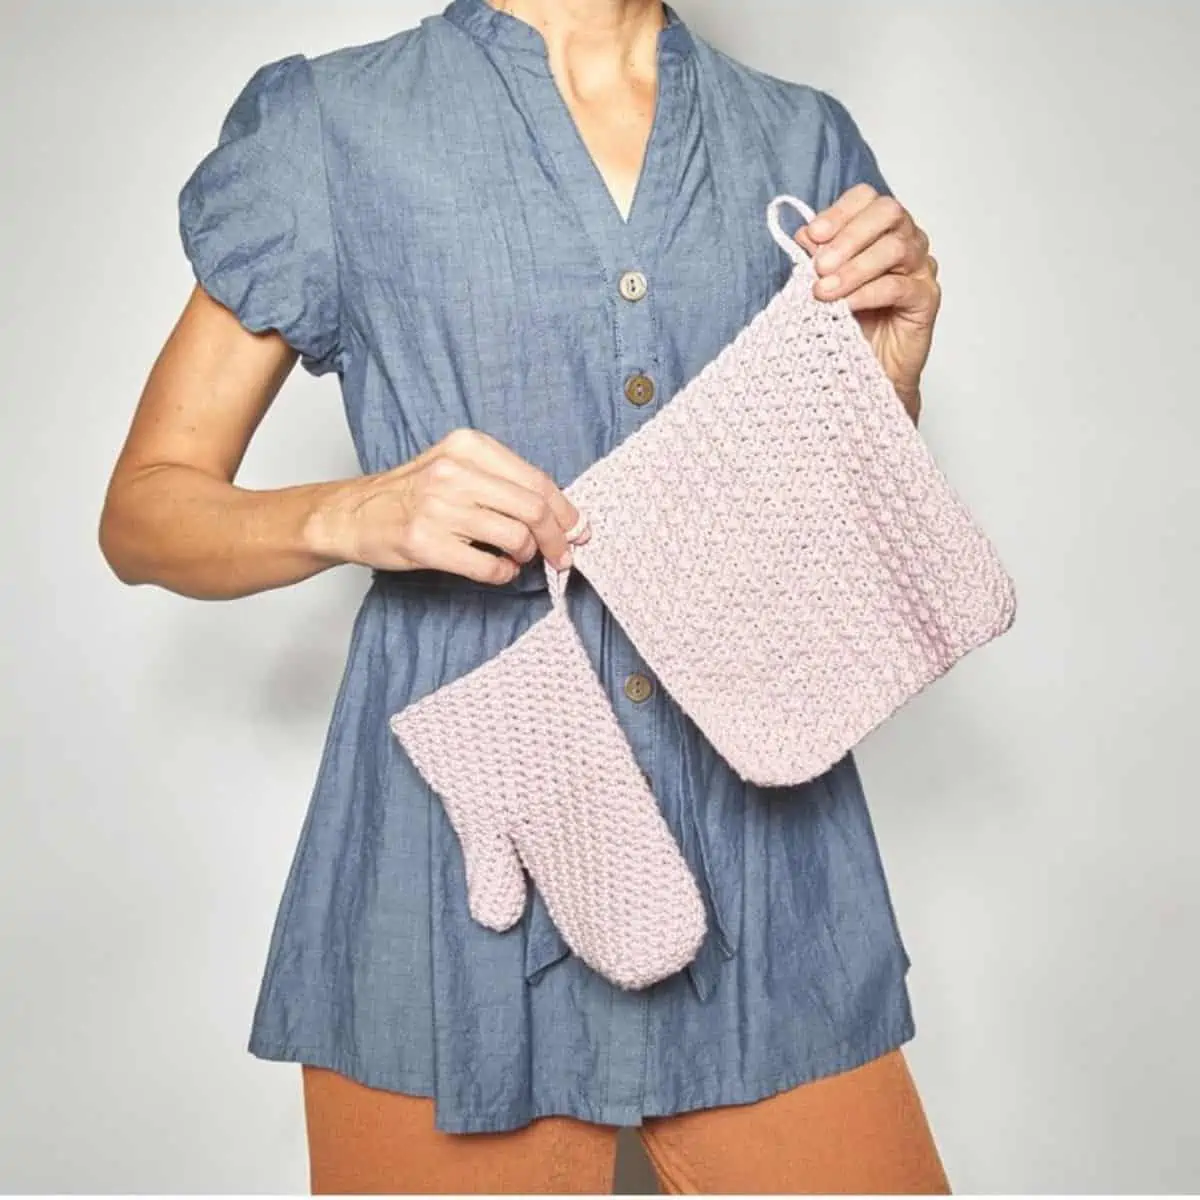 woman holding a pink crochet oven mitt and potholder